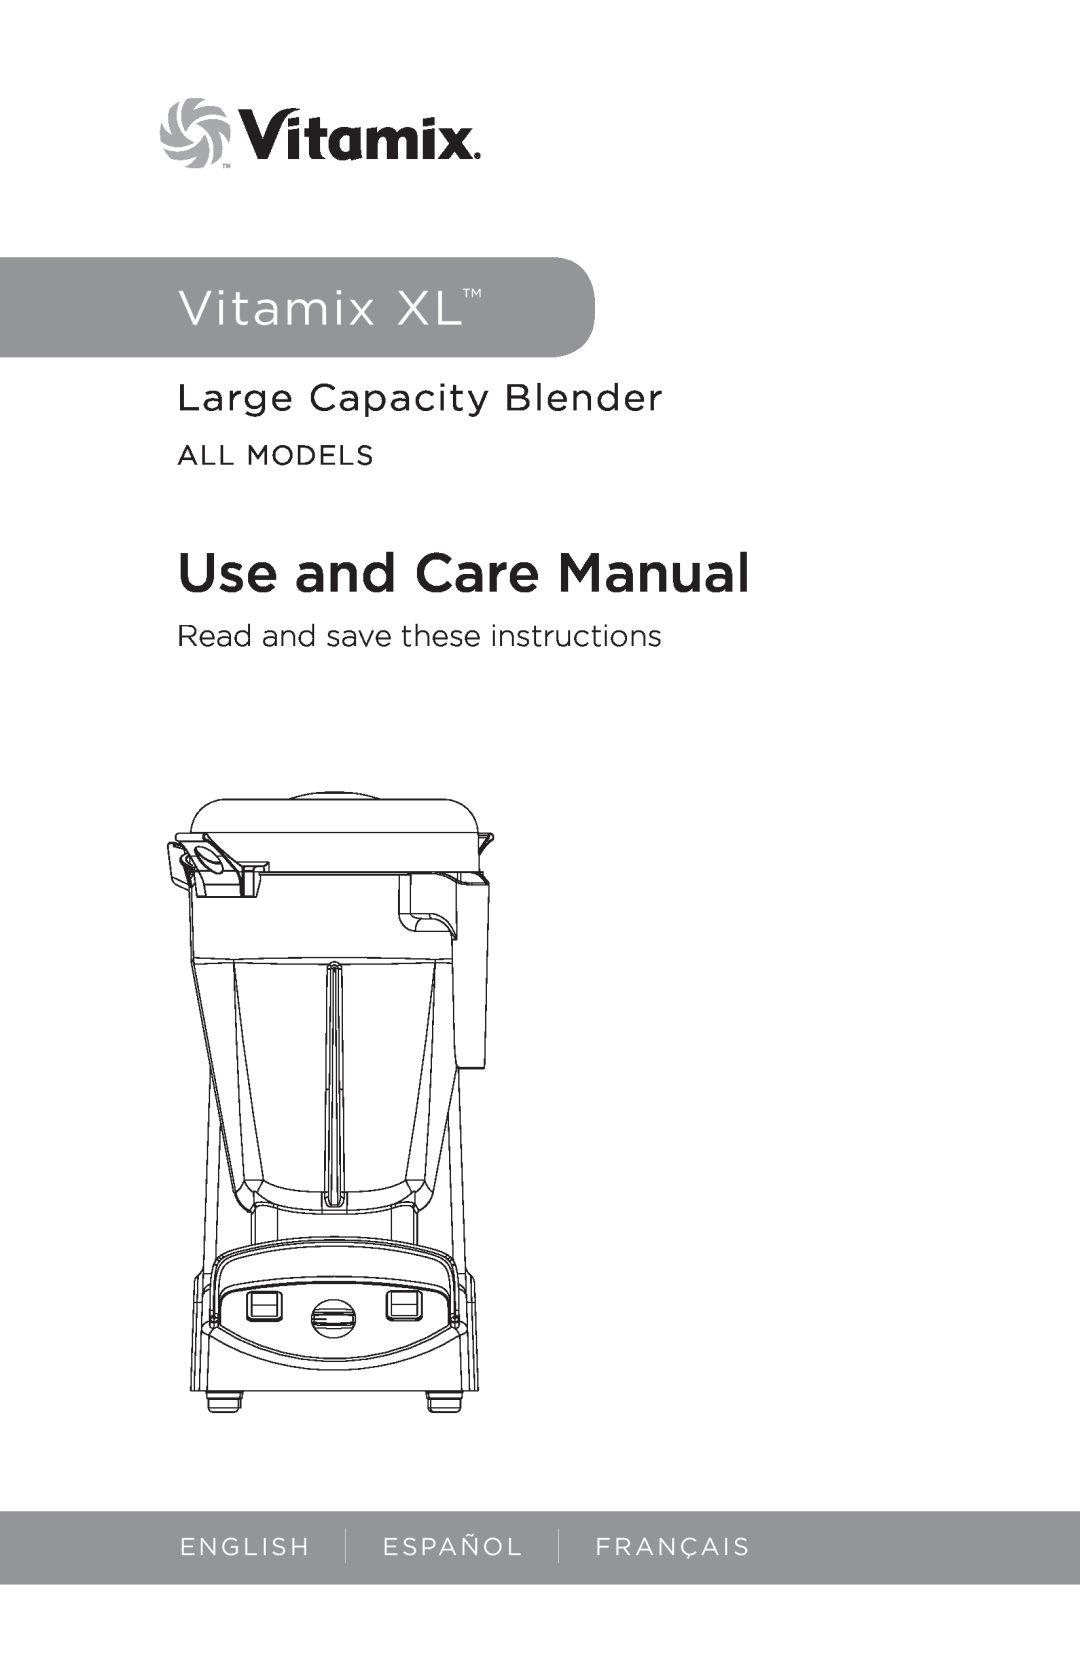 Vita-Mix manual Use and Care Manual, Vitamix XL, Large Capacity Blender, Read and save these instructions, All Models 